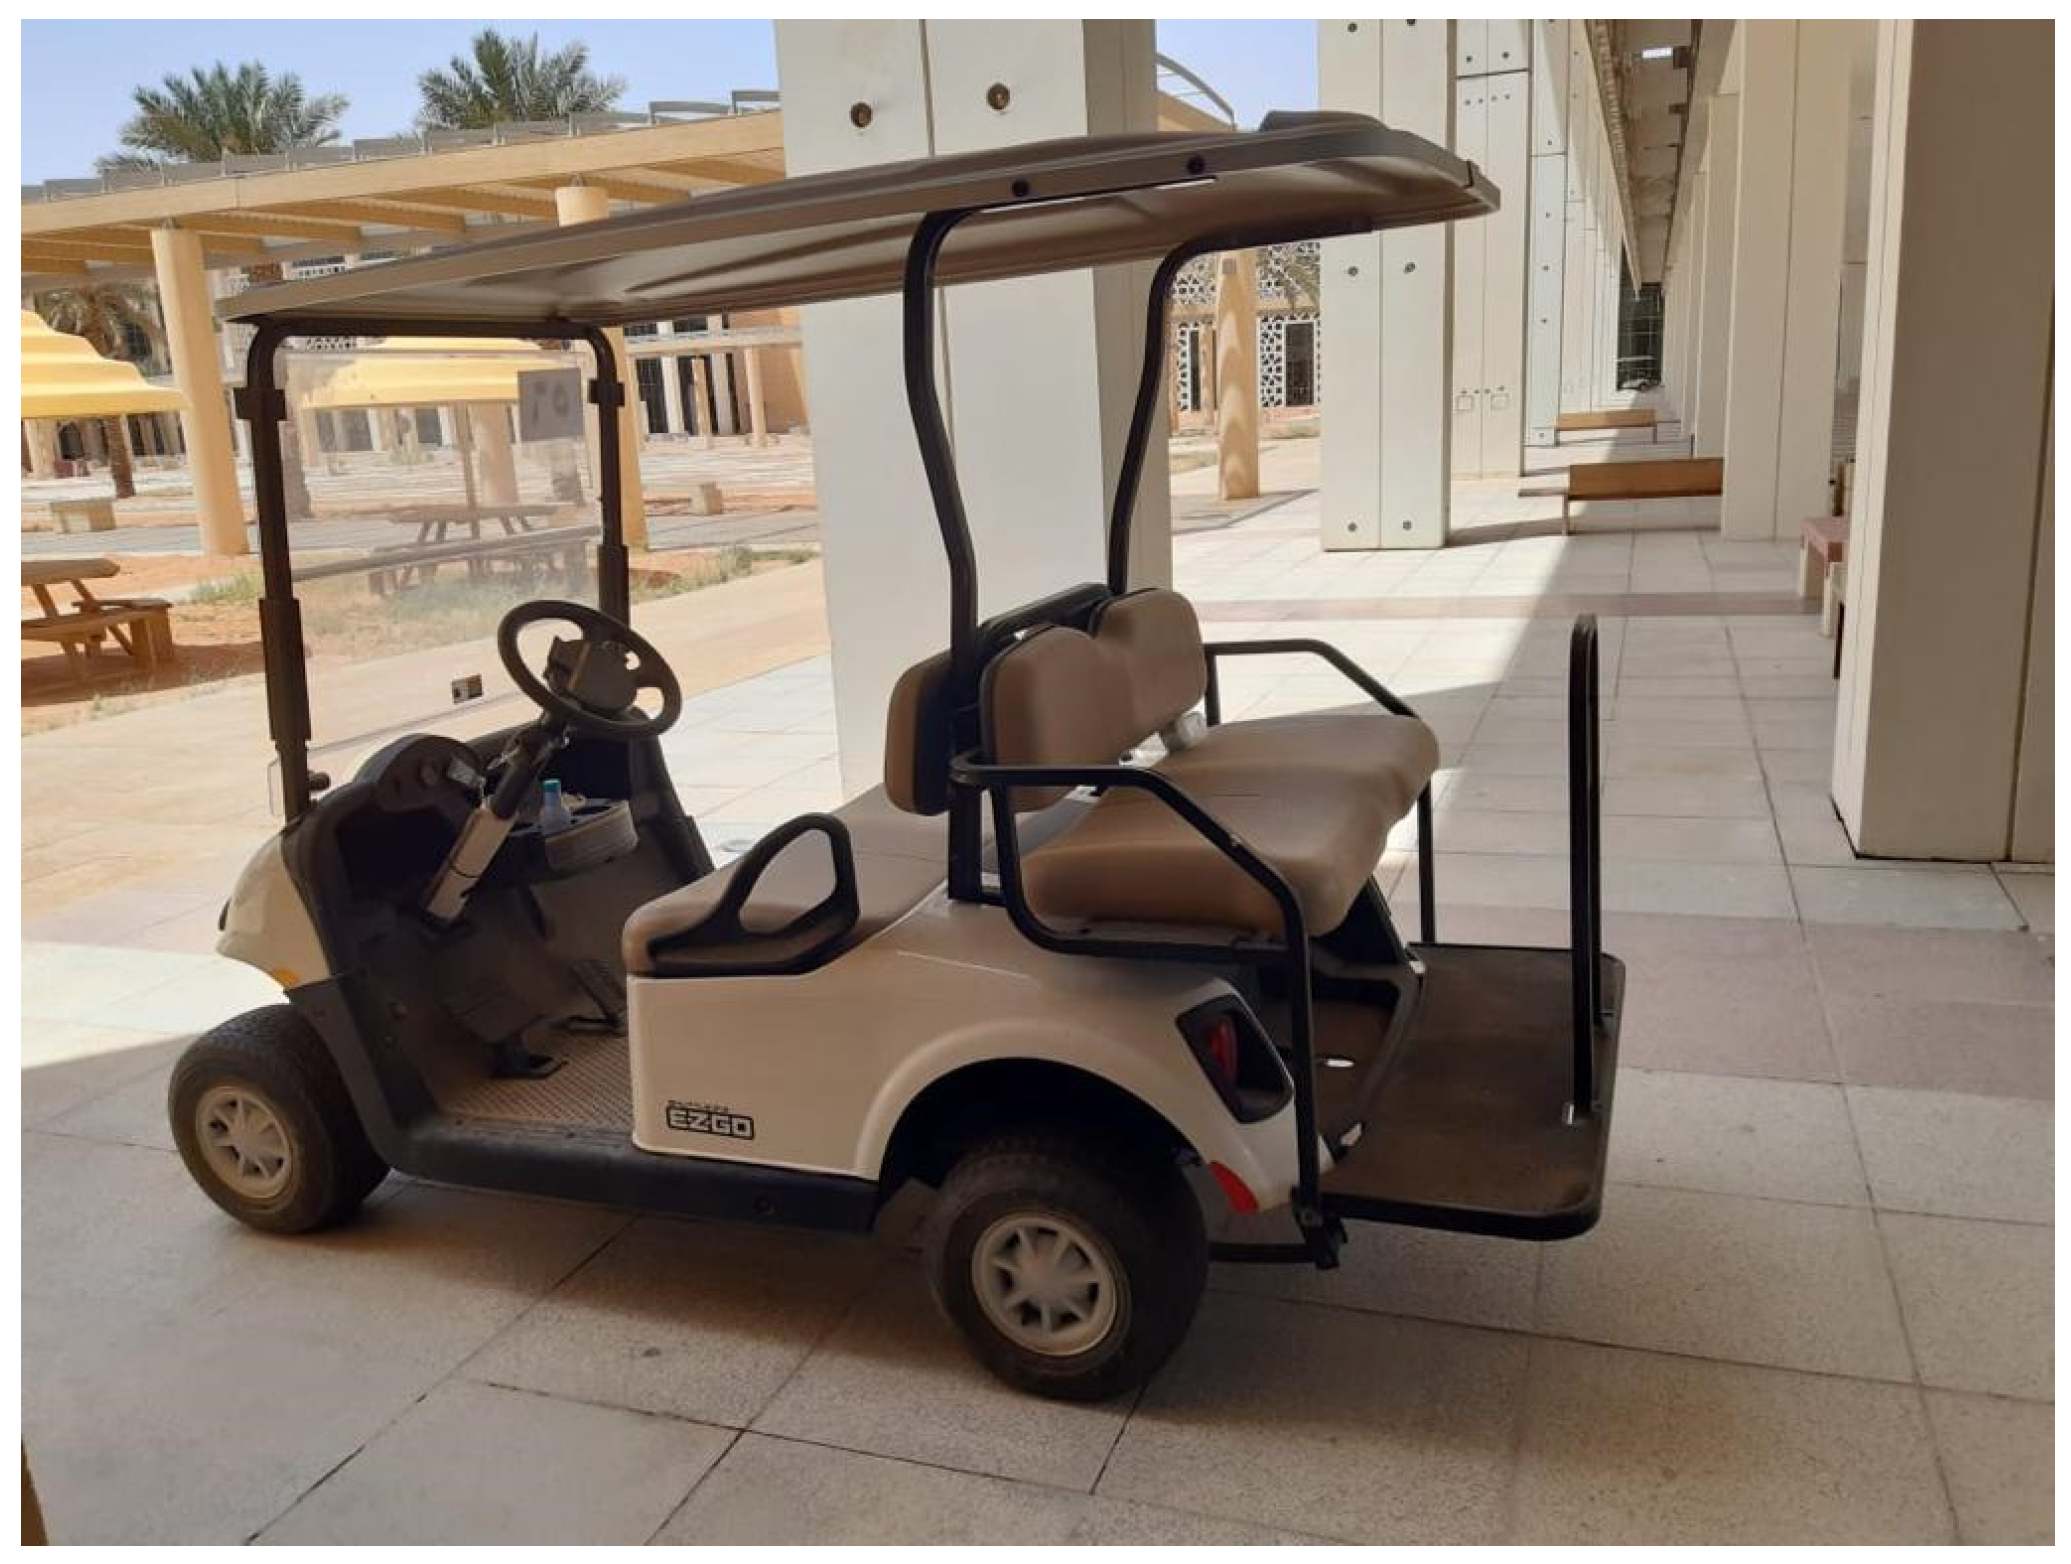 Energies | Free Full-Text | An Investigation into Conversion of a Fleet of  Plug-in-Electric Golf Carts into Solar Powered Vehicles Using Fuzzy Logic  Control